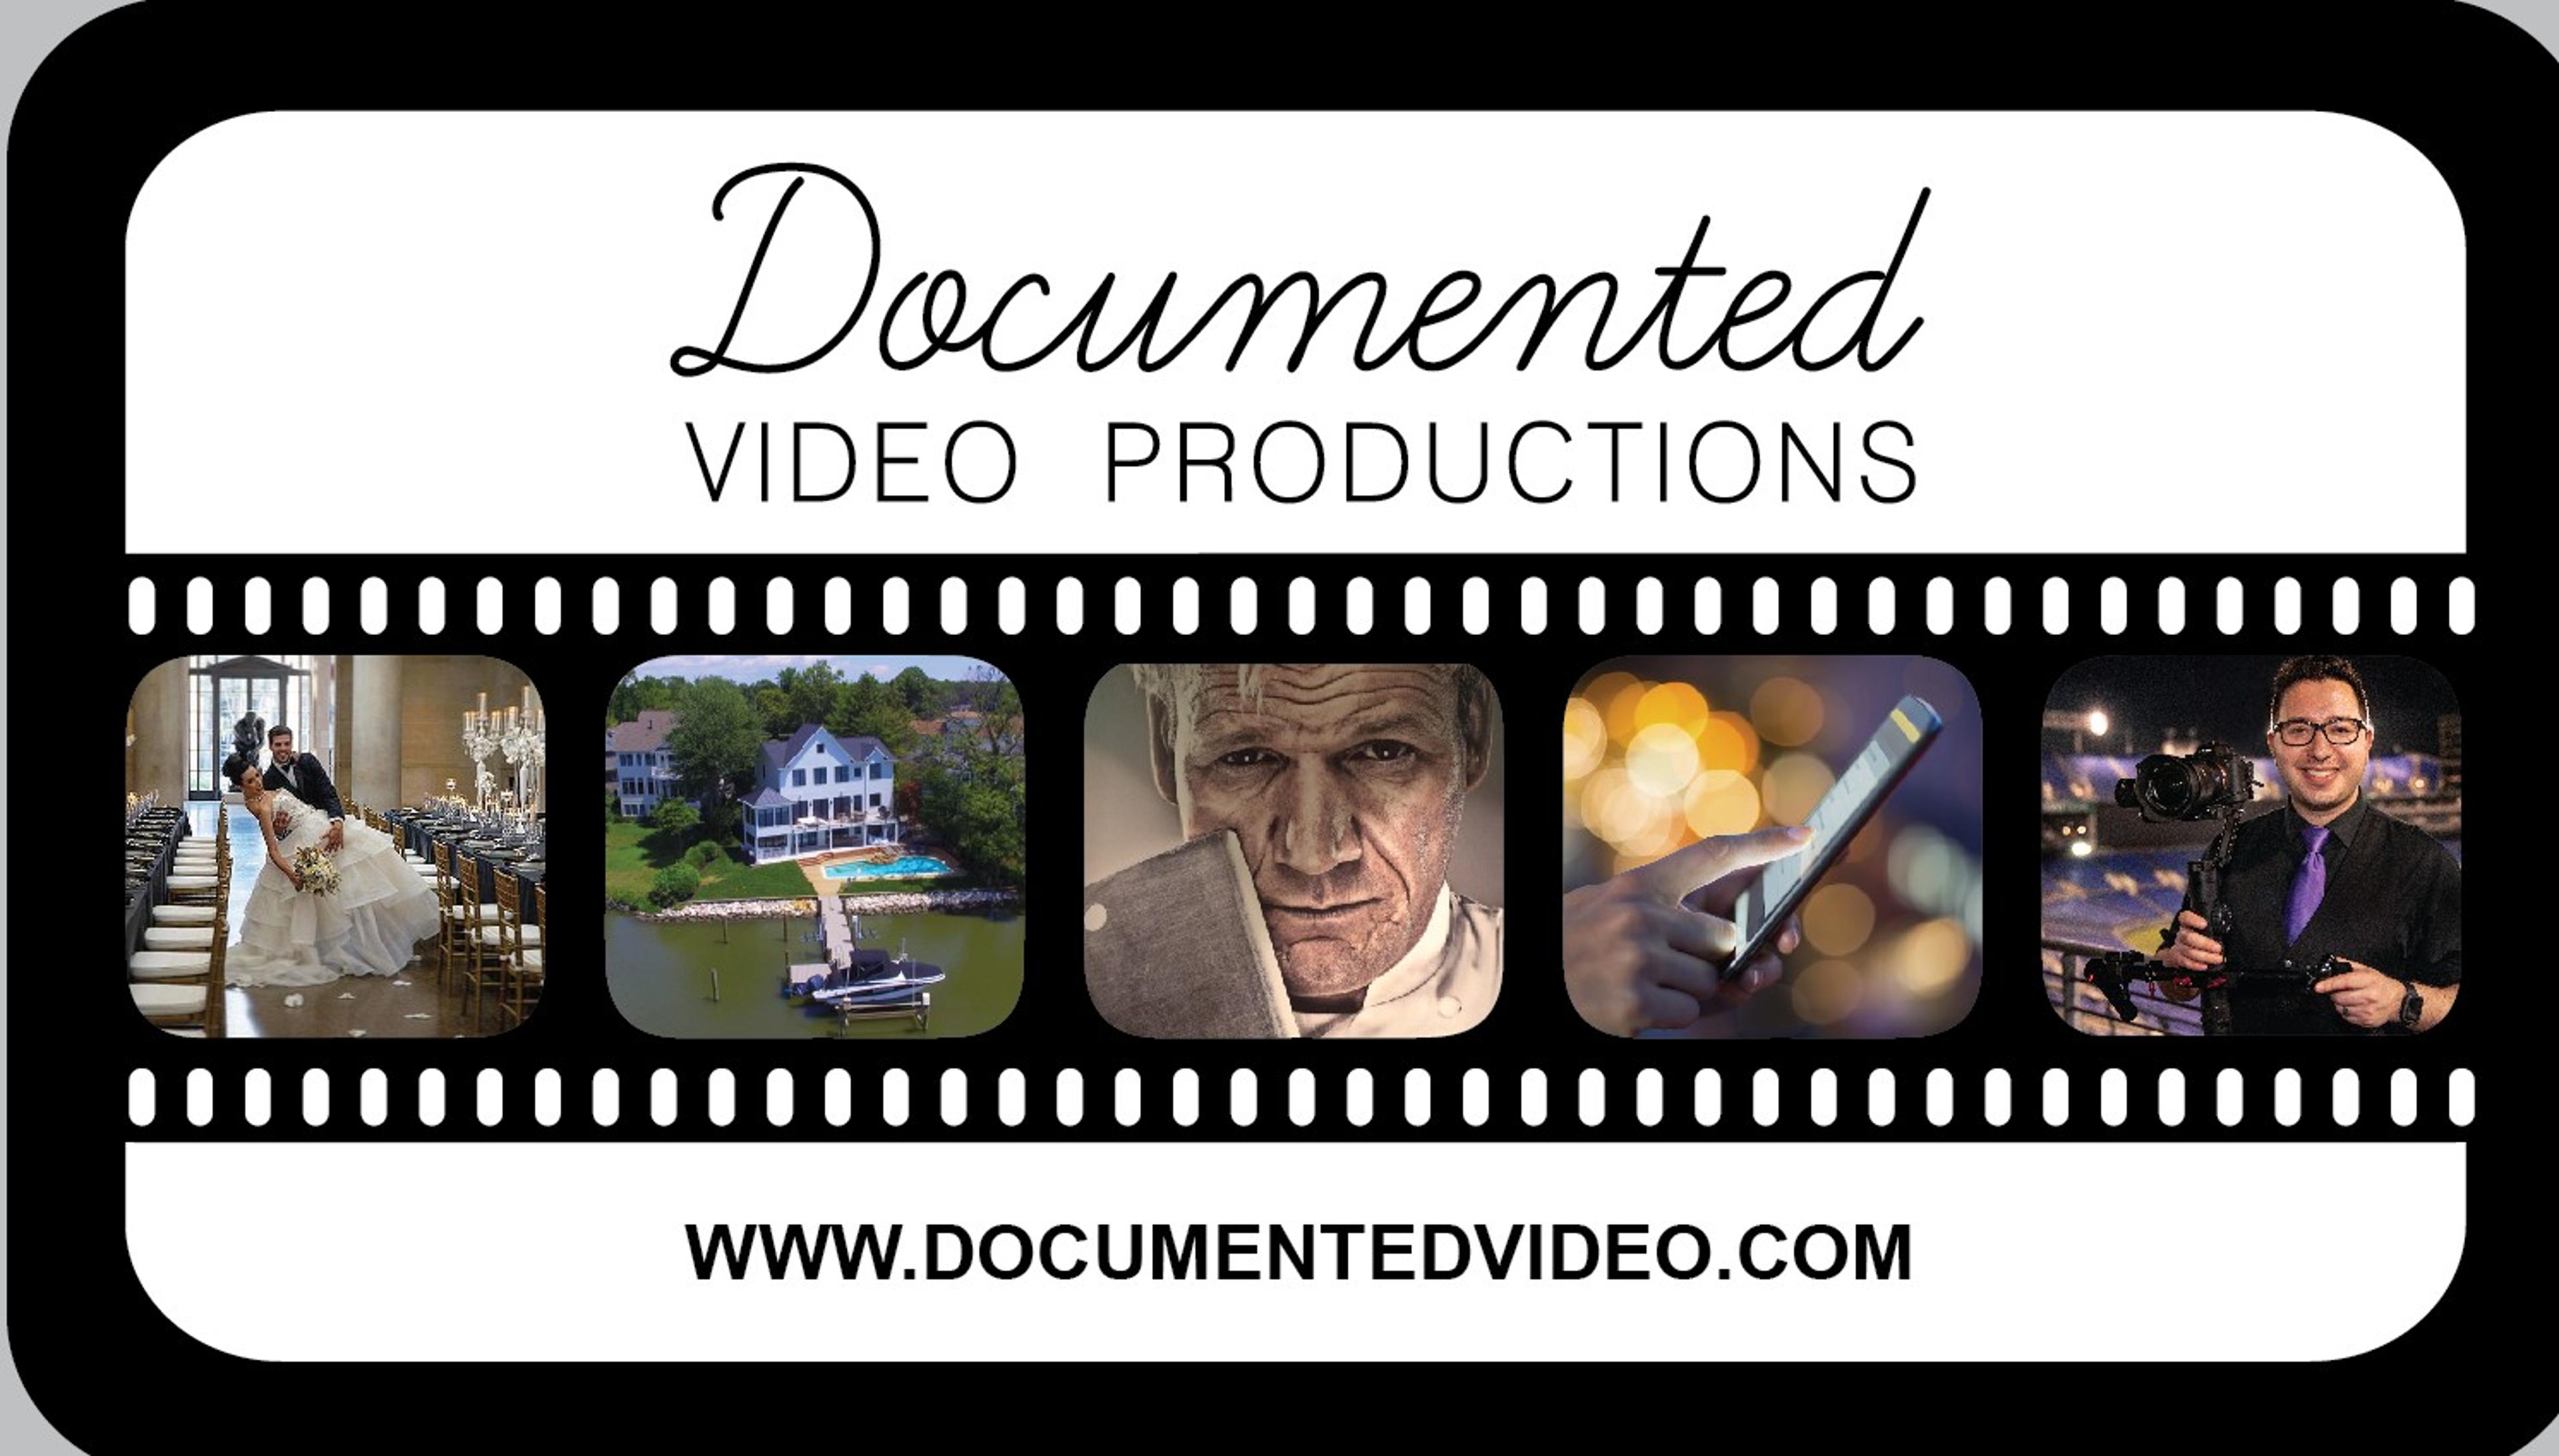 Documented Video Productions